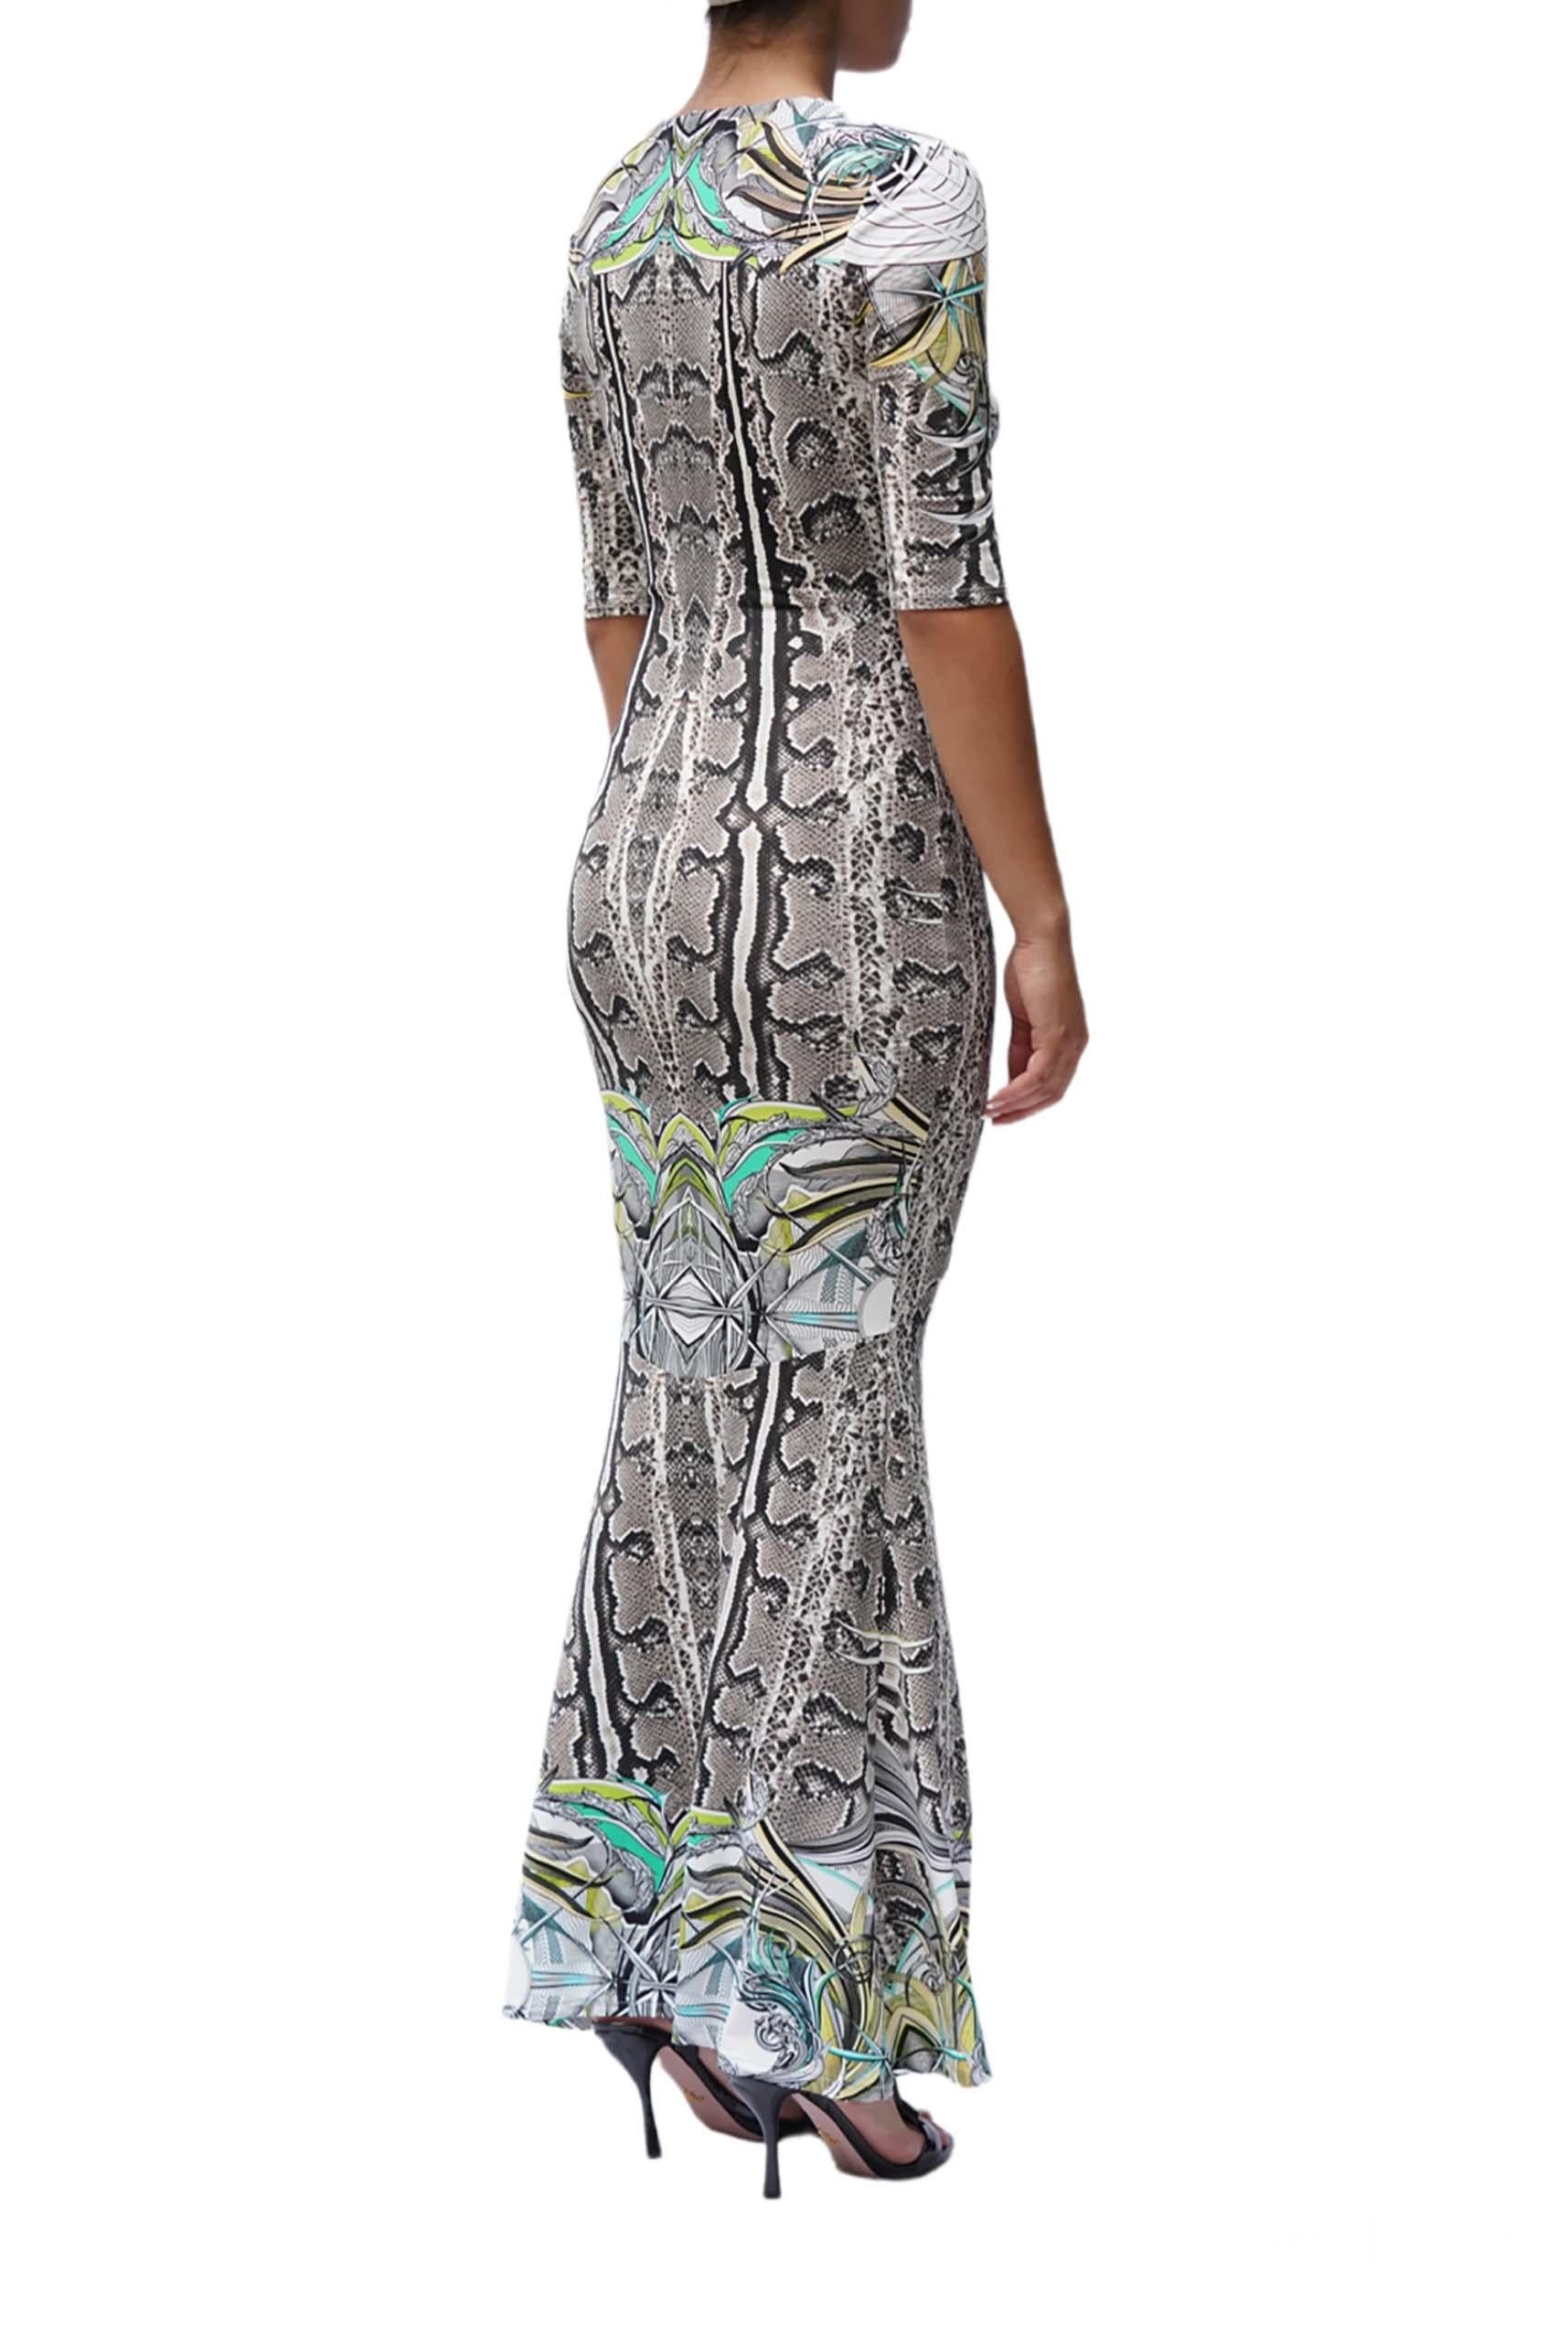 2000S ROBERTO CAVALLI Snake Print Multicolored Jersey Long Sleeve  Dress For Sale 2